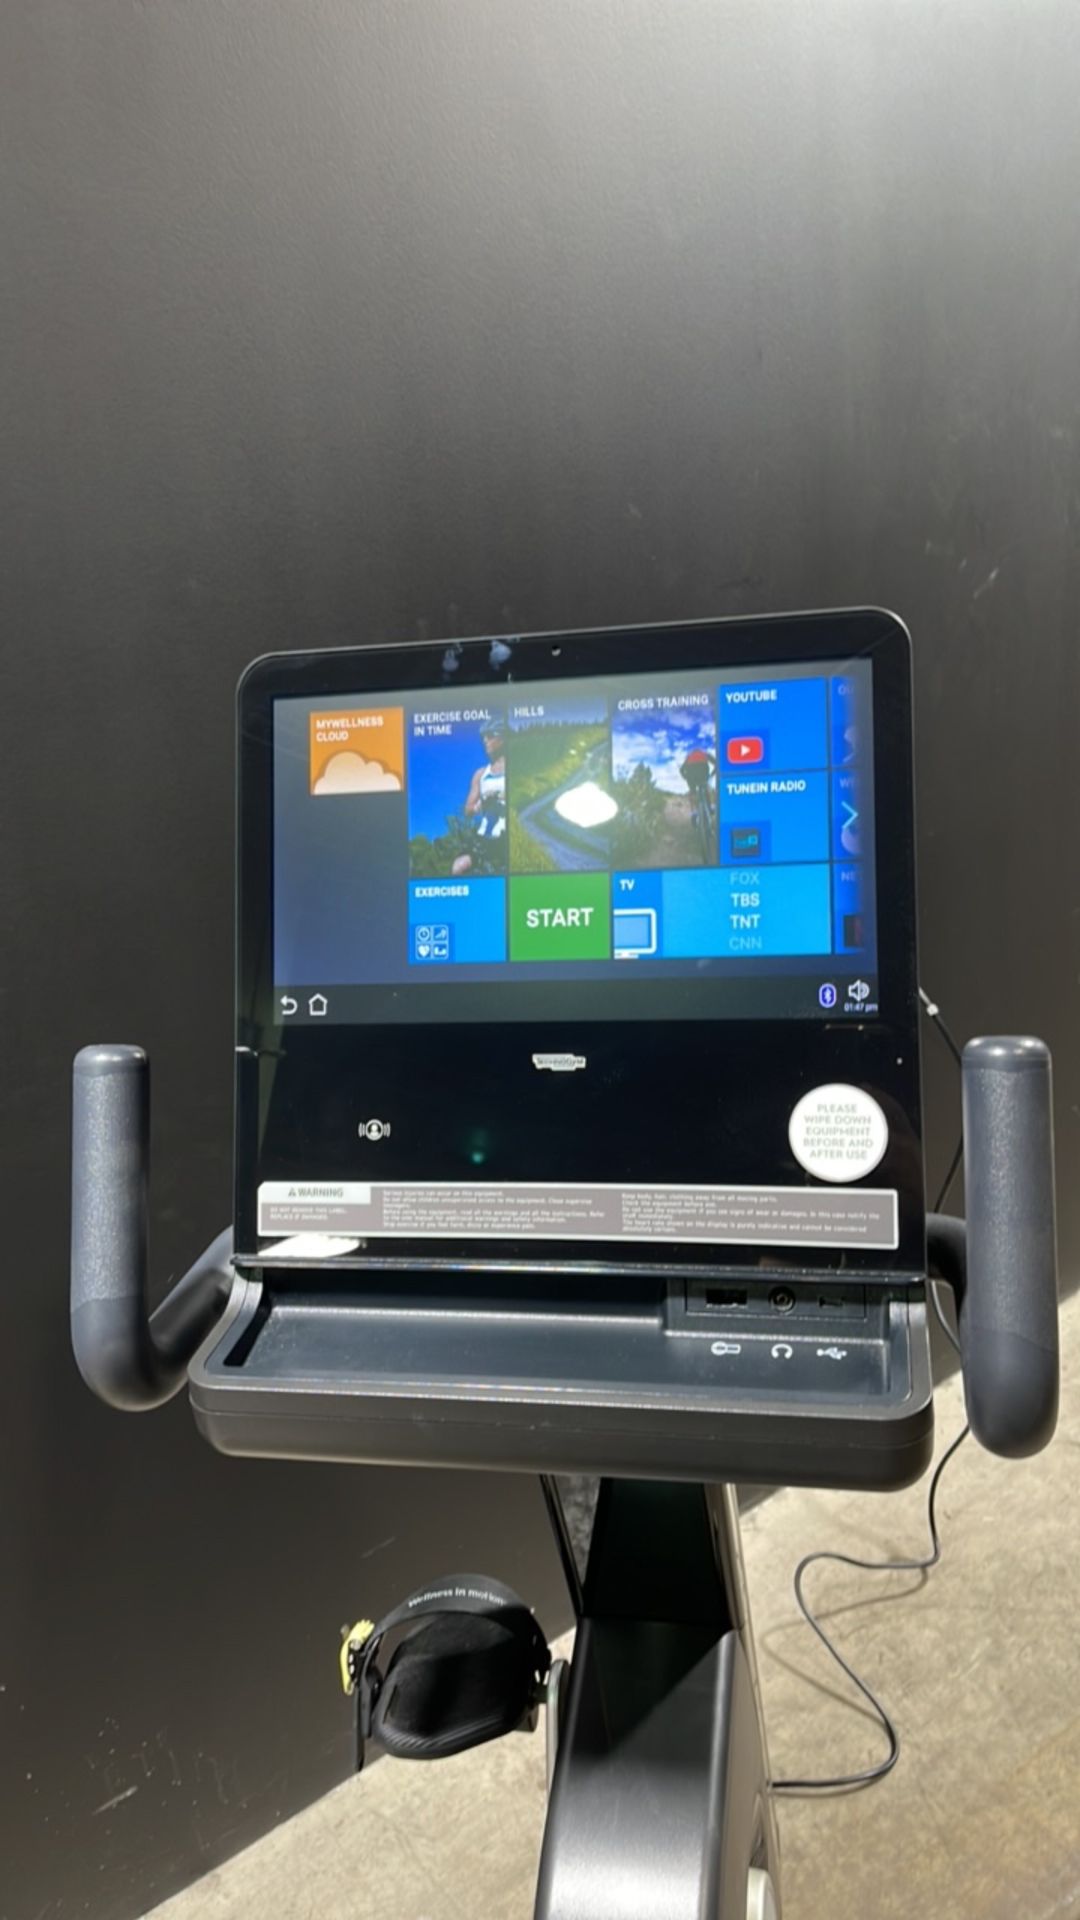 TECHNOGYM EXERCISE BIKE WITH TOUCH SCREEN MONITOR - Image 3 of 4